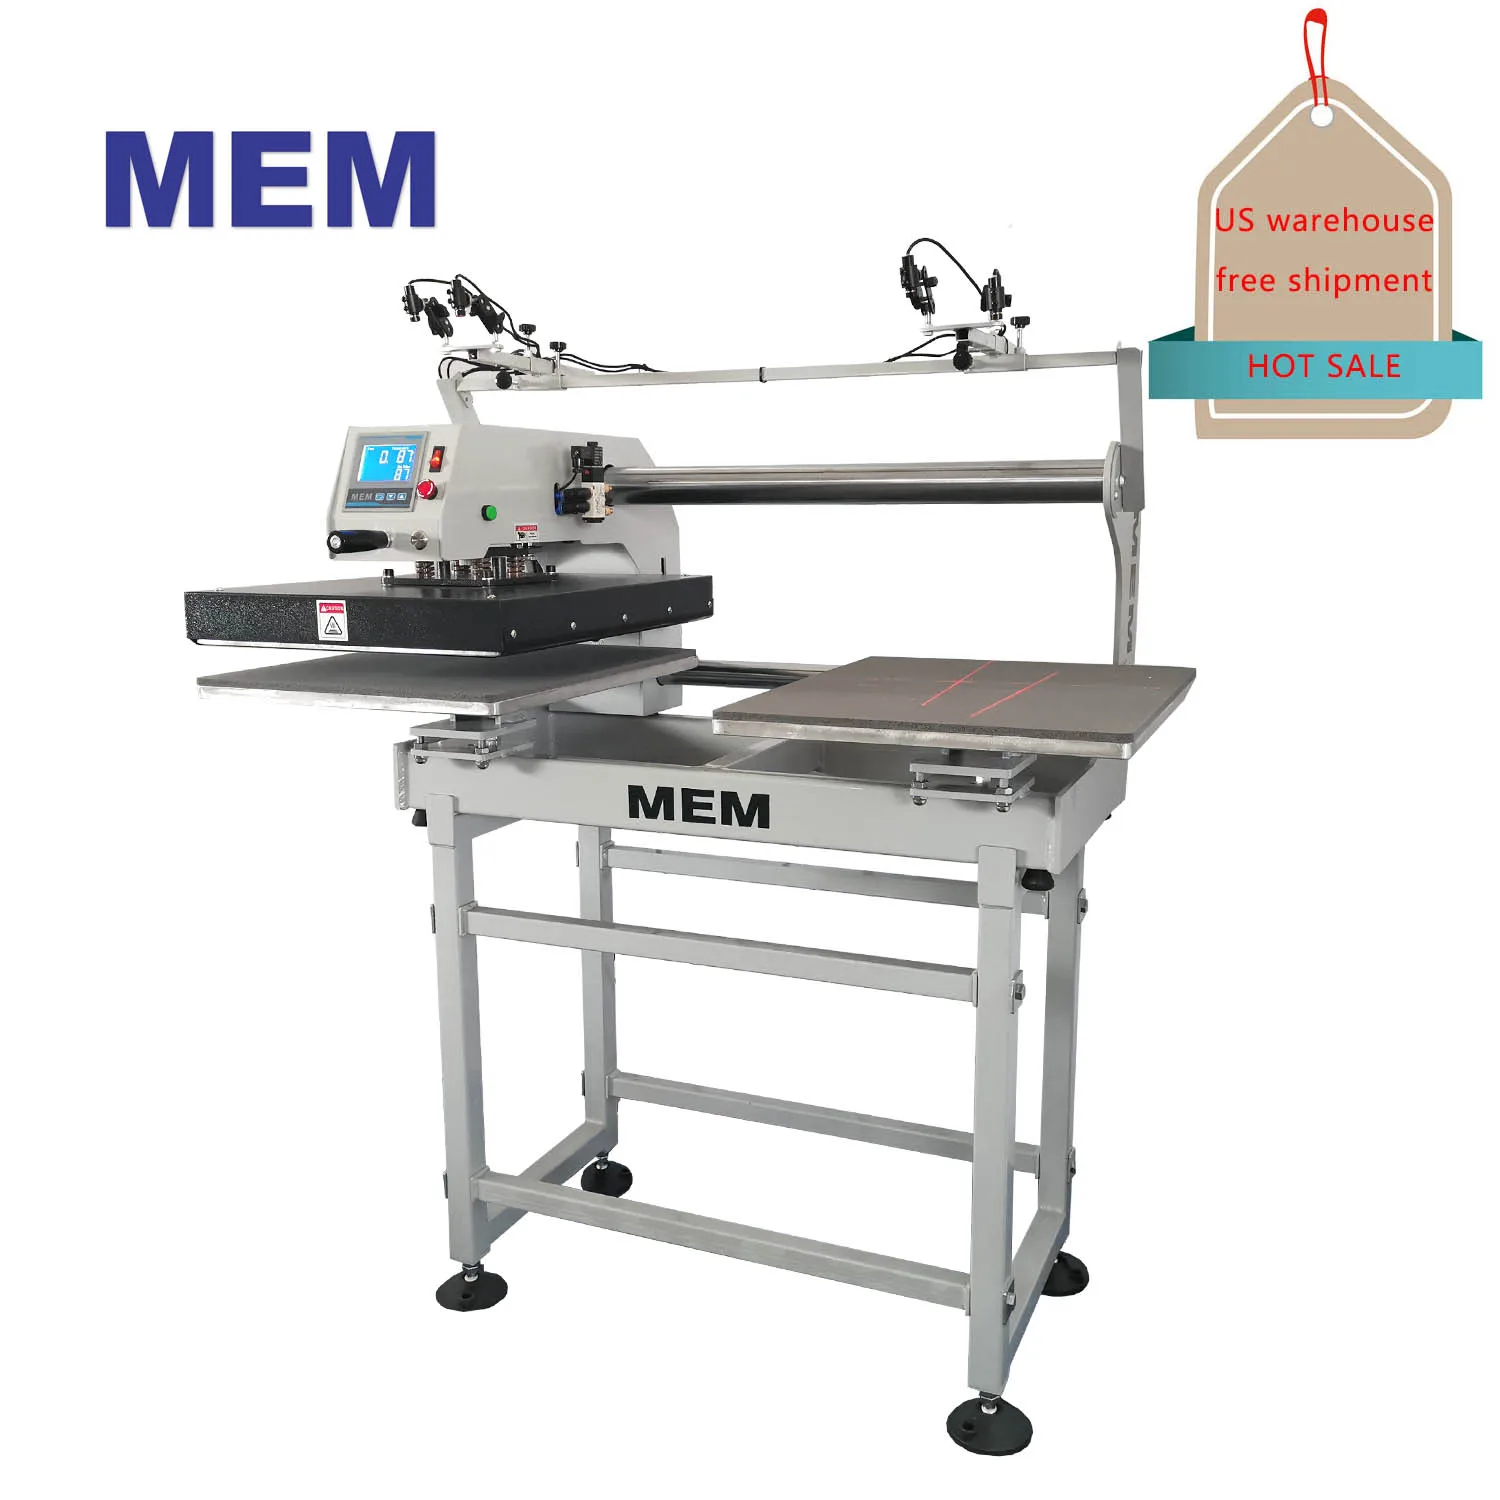 

Free shipment industrial grade all day work good result pneumatic dual heat press machine 40 x 50 cm in US warehouse